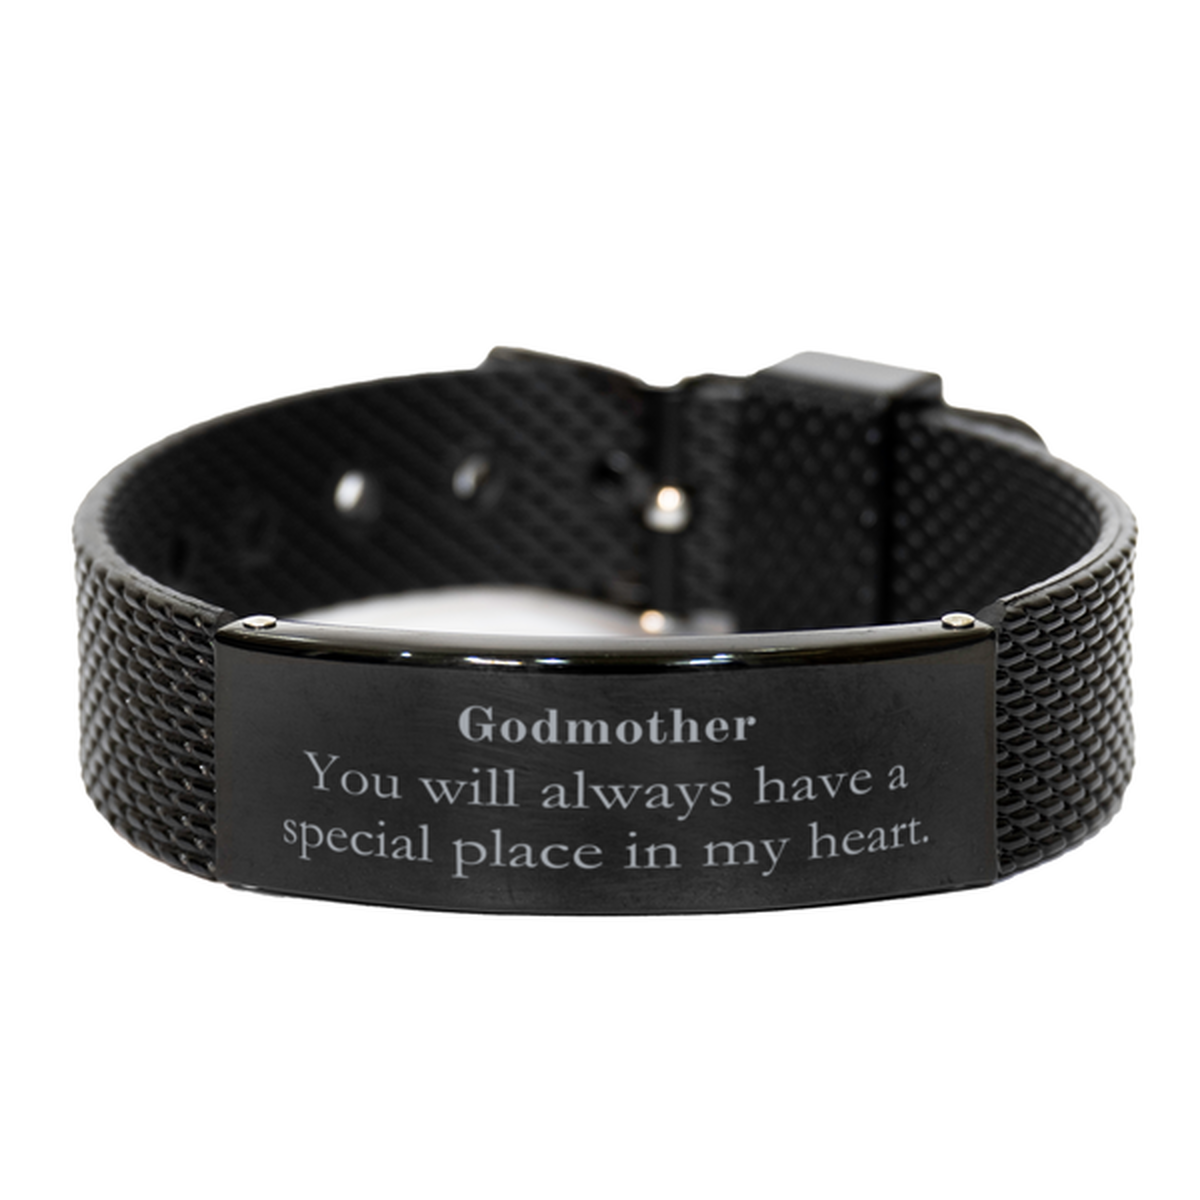 Godmother Black Shark Mesh Bracelet - Special Place in My Heart - Unique Gift for Christmas, Graduation, and Holidays - Engraved Confidence and Inspirational Jewelry